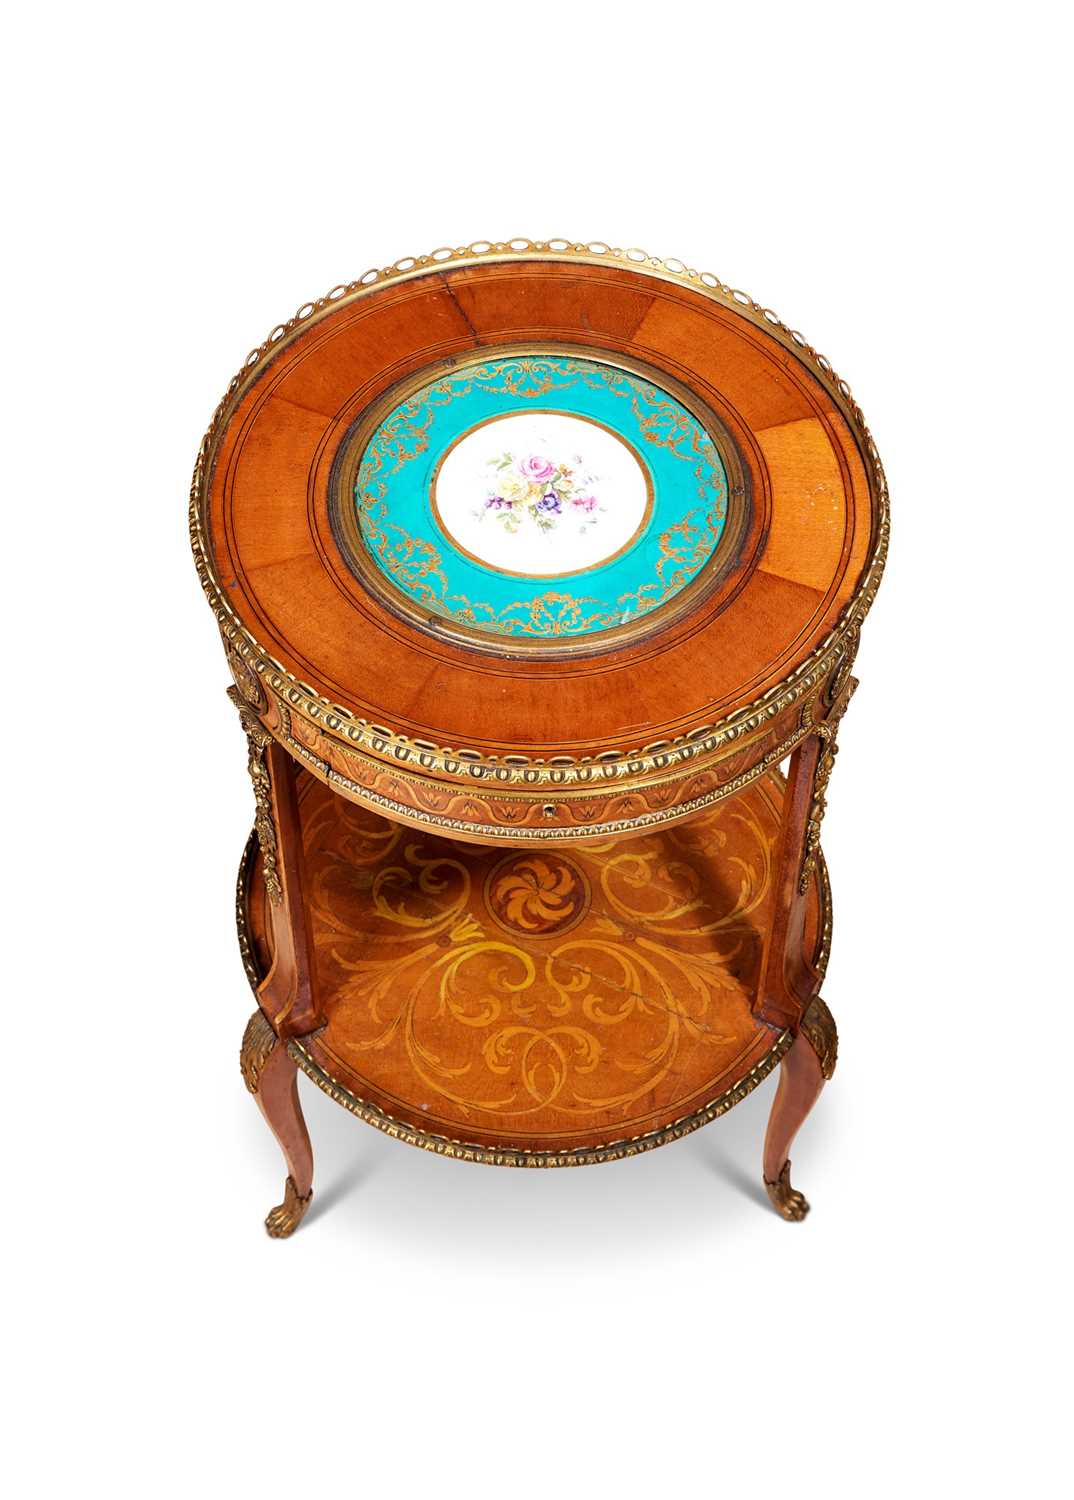 A LATE 19TH CENTURY LOUIS XV STYLE PORCELAIN MOUNTED OCCASIONAL TABLE - Image 3 of 7